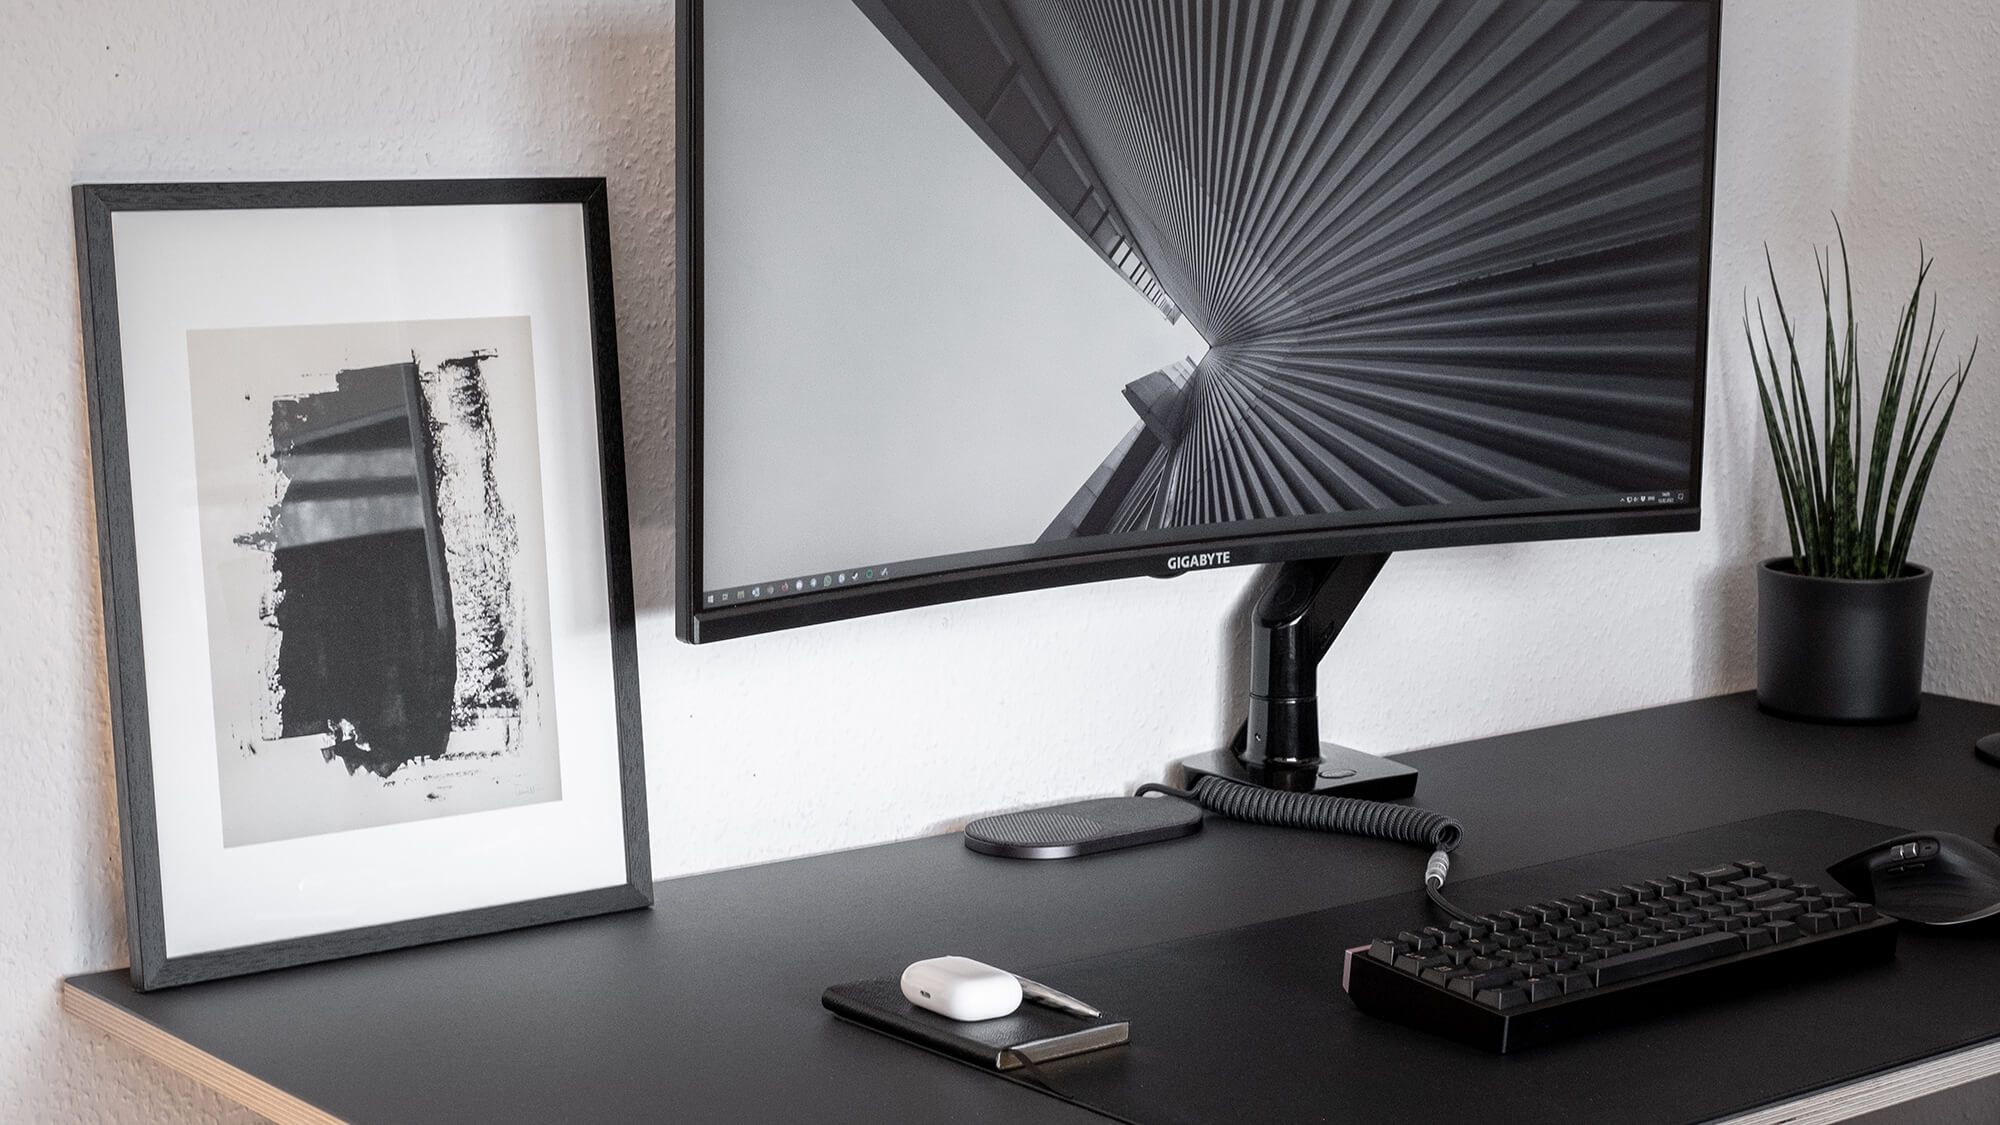 Black and white monochrome desk setup with a plant and an art print